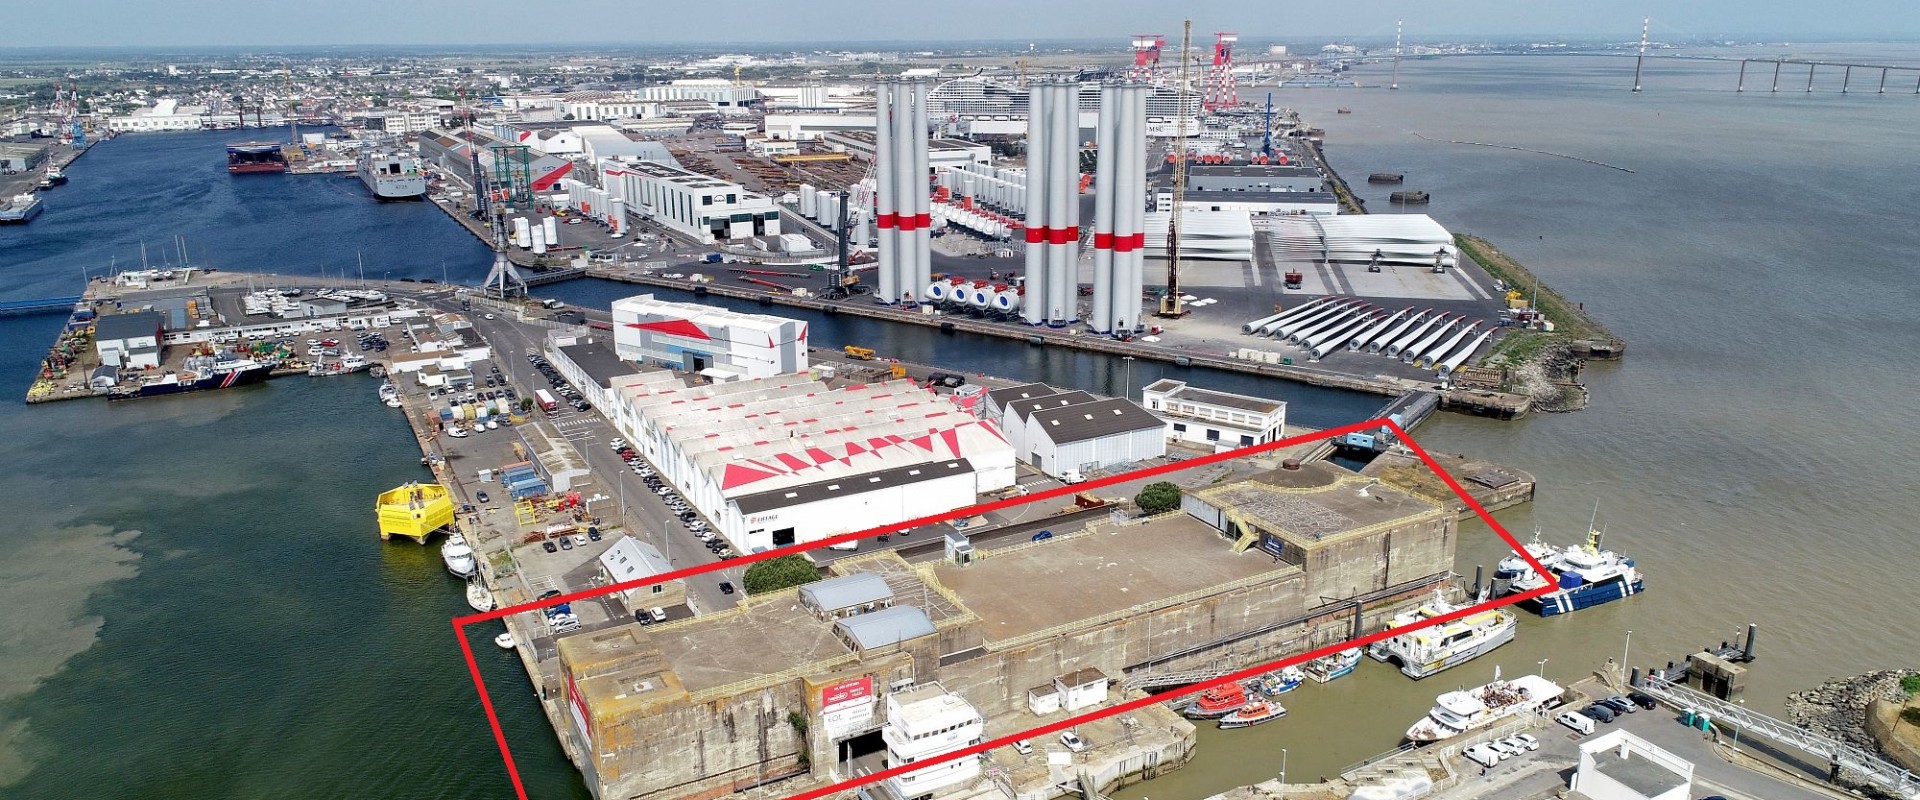 Call for Proposals for the Rooftop of the Fortified Lock in Saint Nazaire